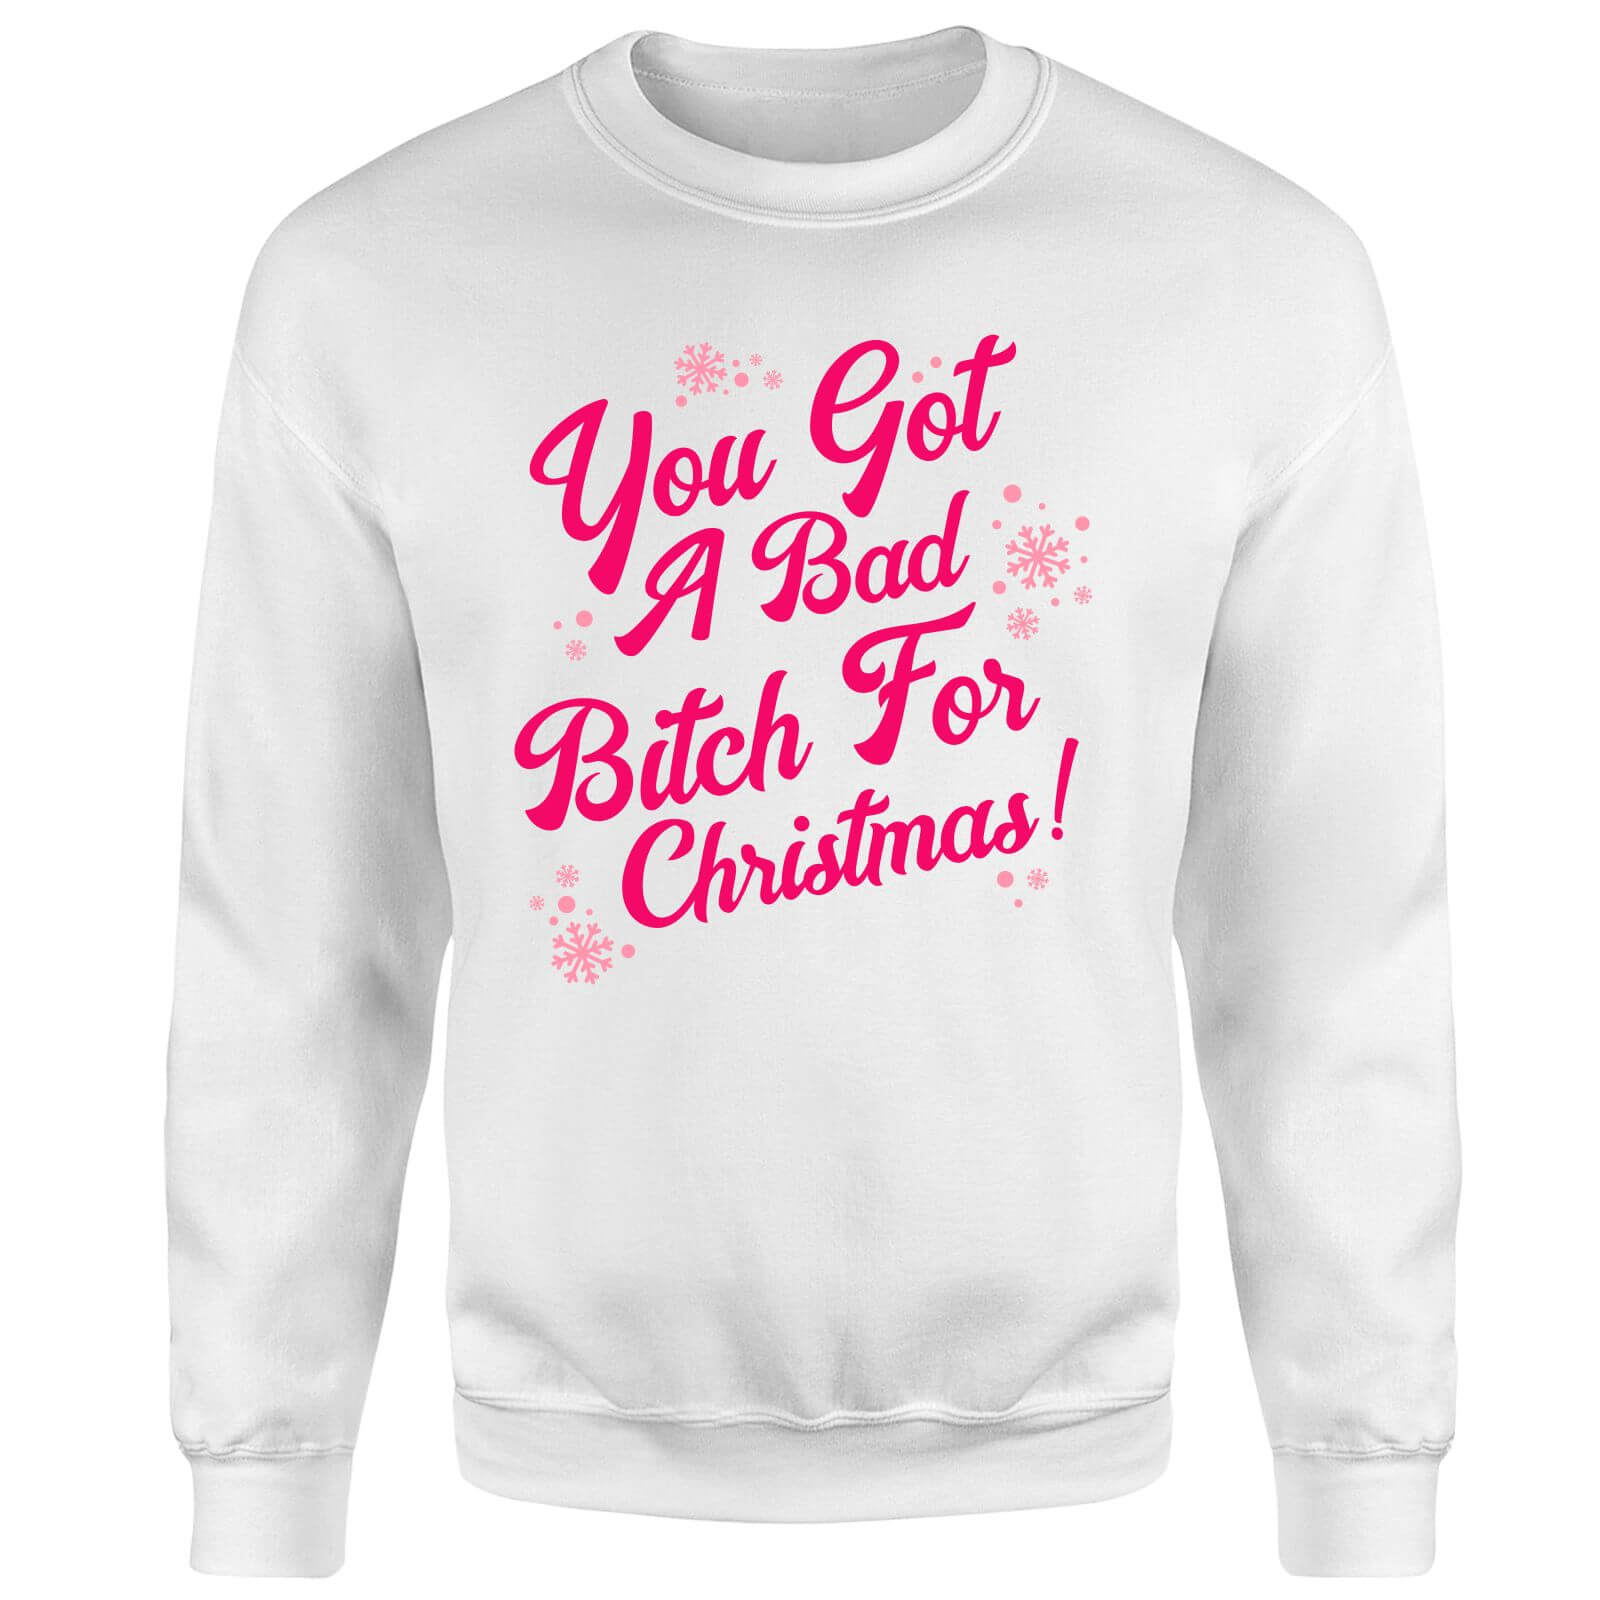 Snowy You Got A Bad Bitch For Christmas Unisex Sweatshirt - White - S - White